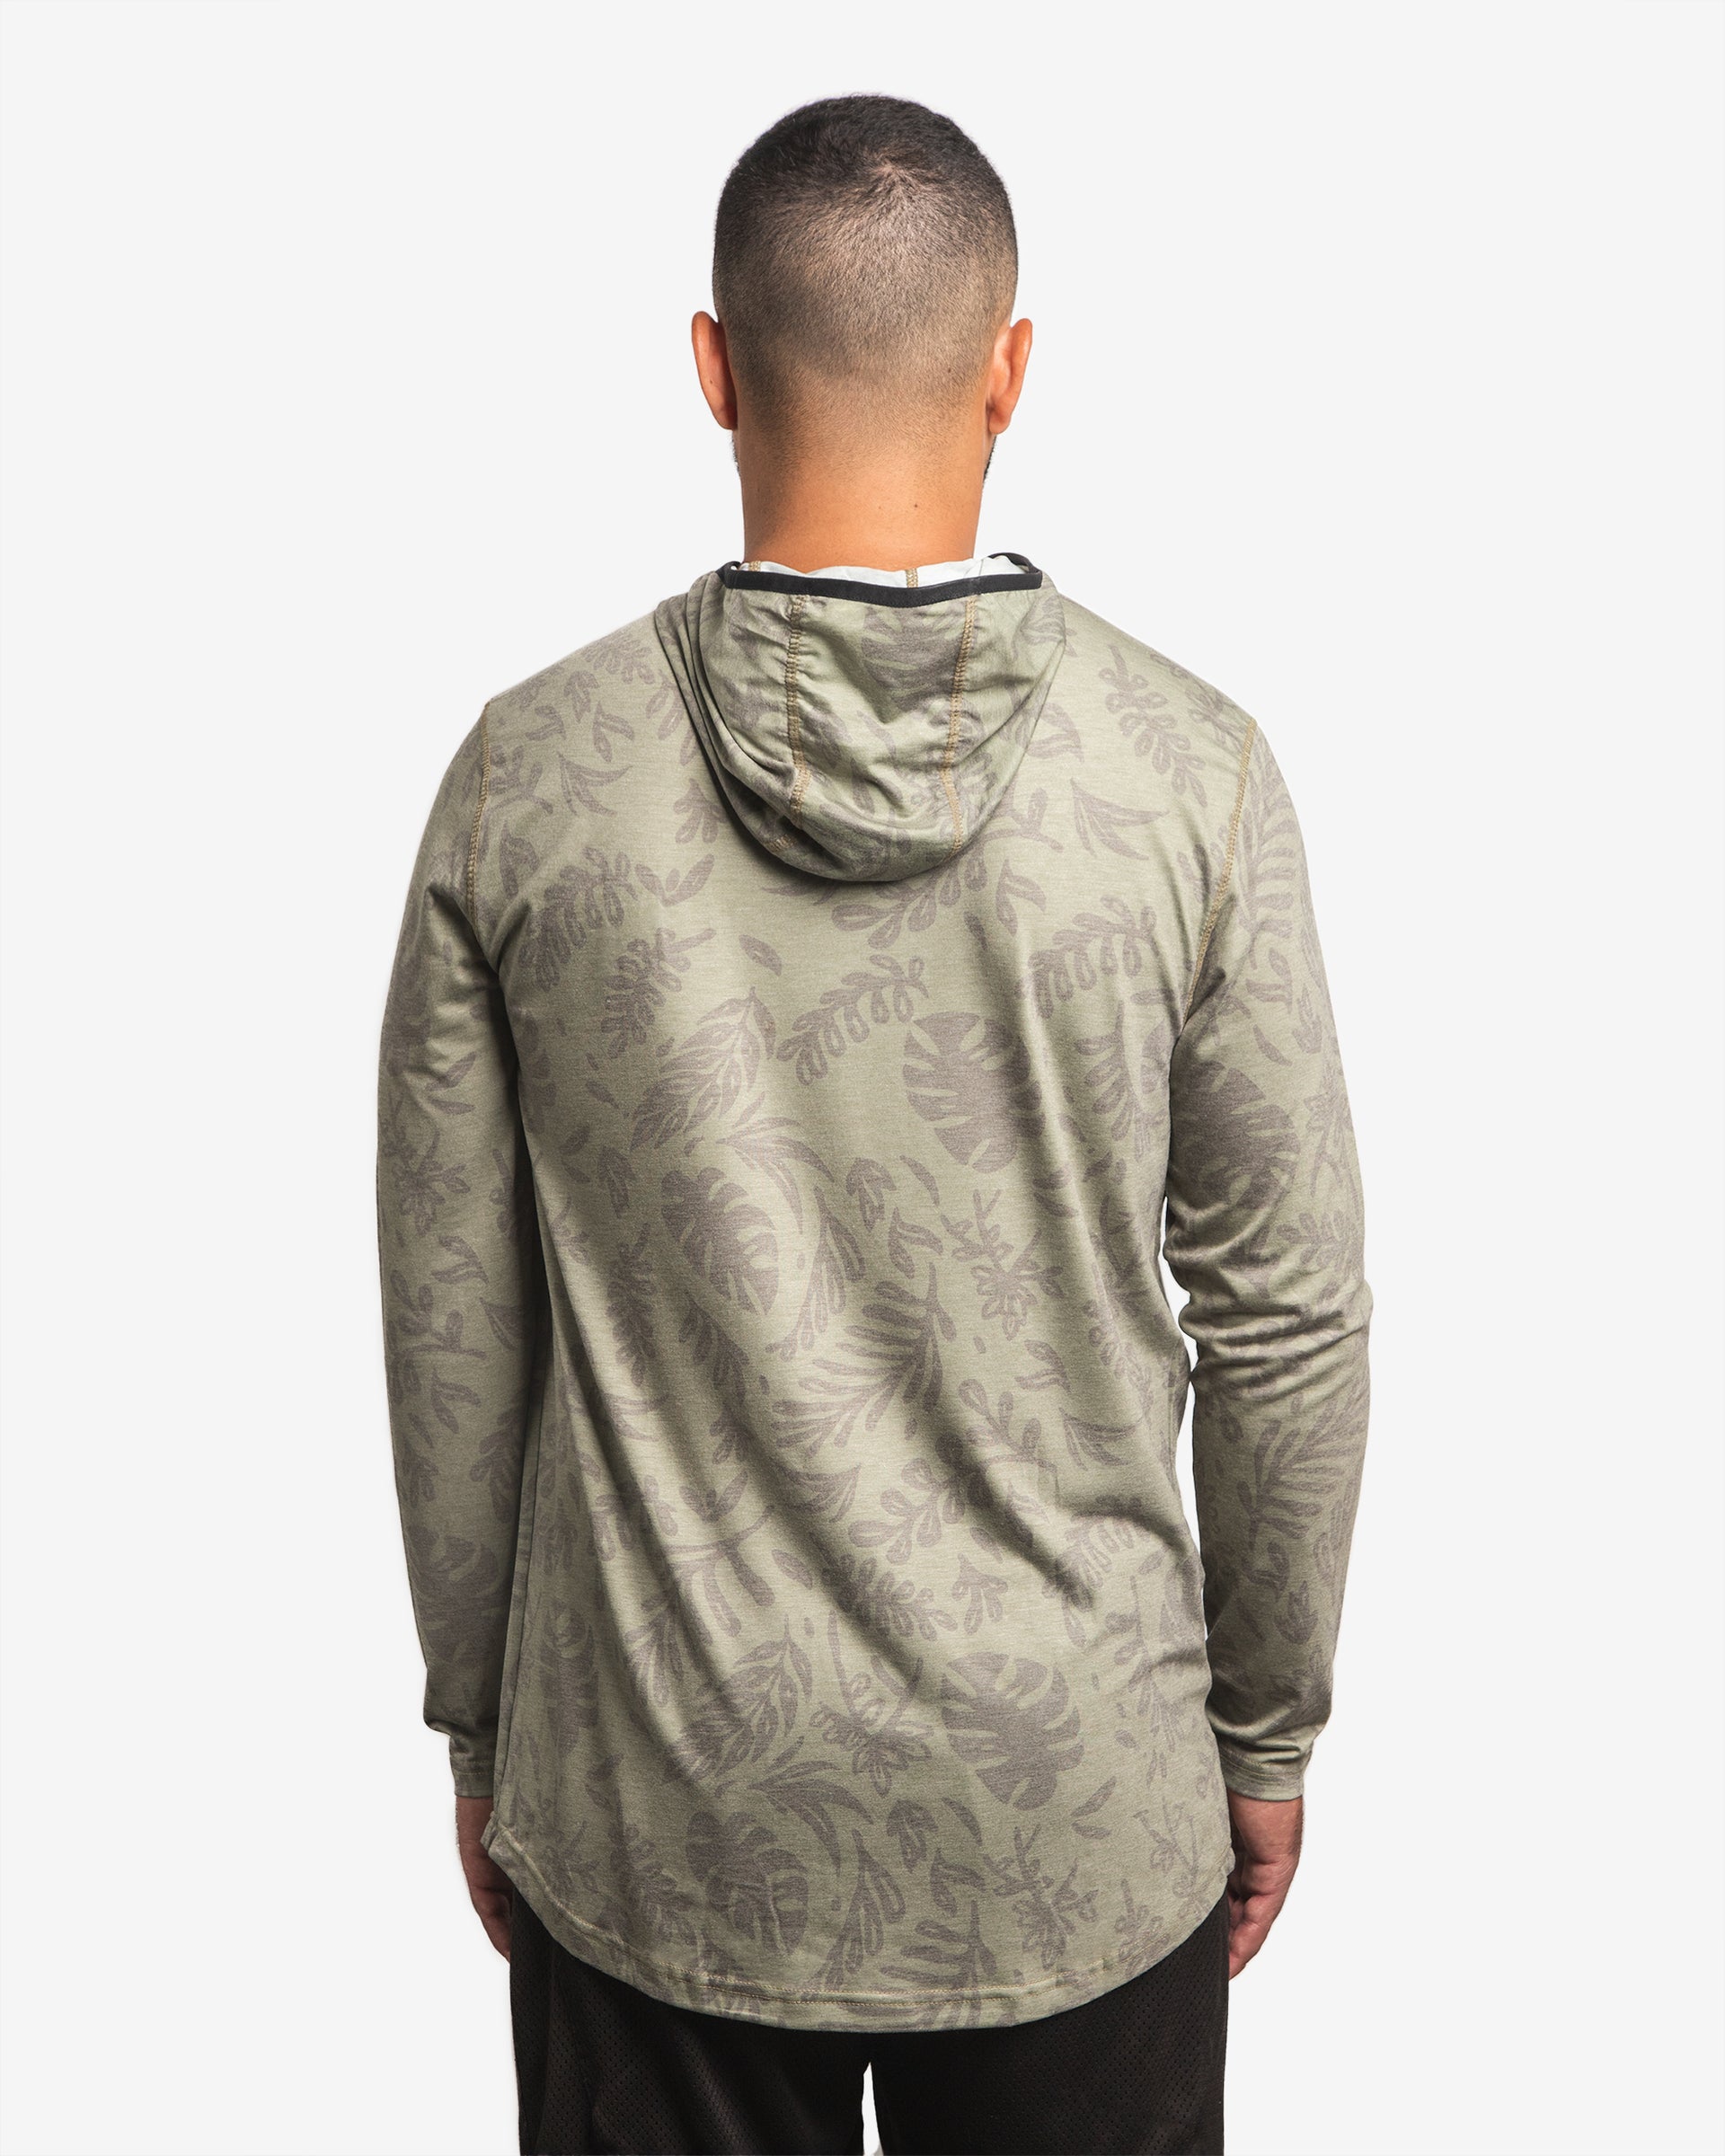 Back view of male model wearing the Jigalode Mighty Jig Performance Fishing Hoodie in moss green with an all-over tropical plant pattern. The hoodie, with the hood off, features a super soft fabric and offers UPF 30 sun protection. The model highlights the hoodie's design and comfort.